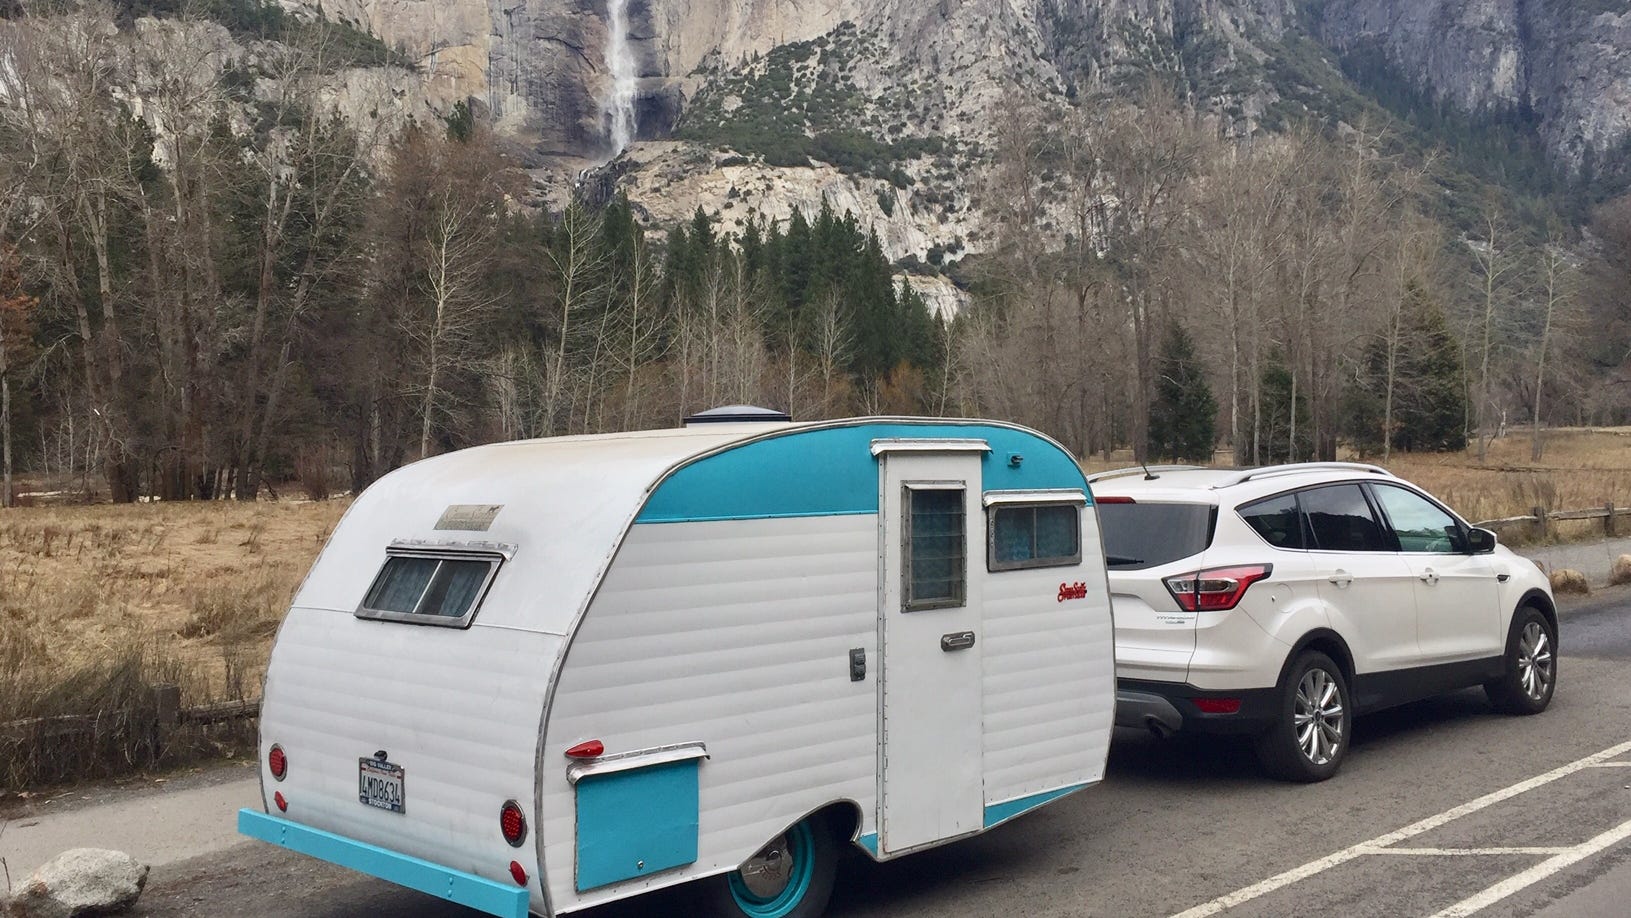 COVID19 Small travel trailers are a fun, relatively safe